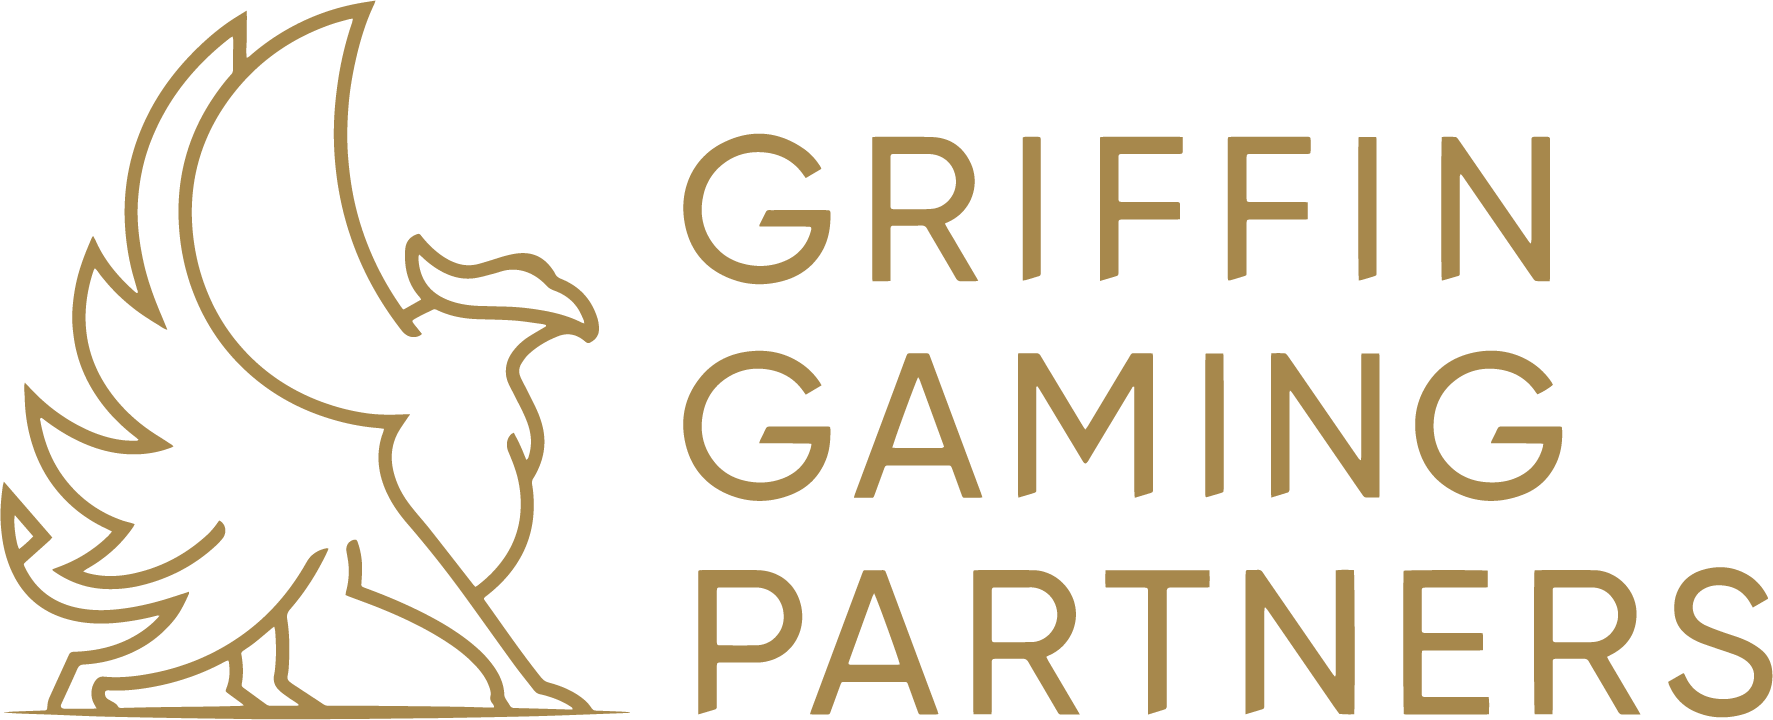 griffin gaming partners 1